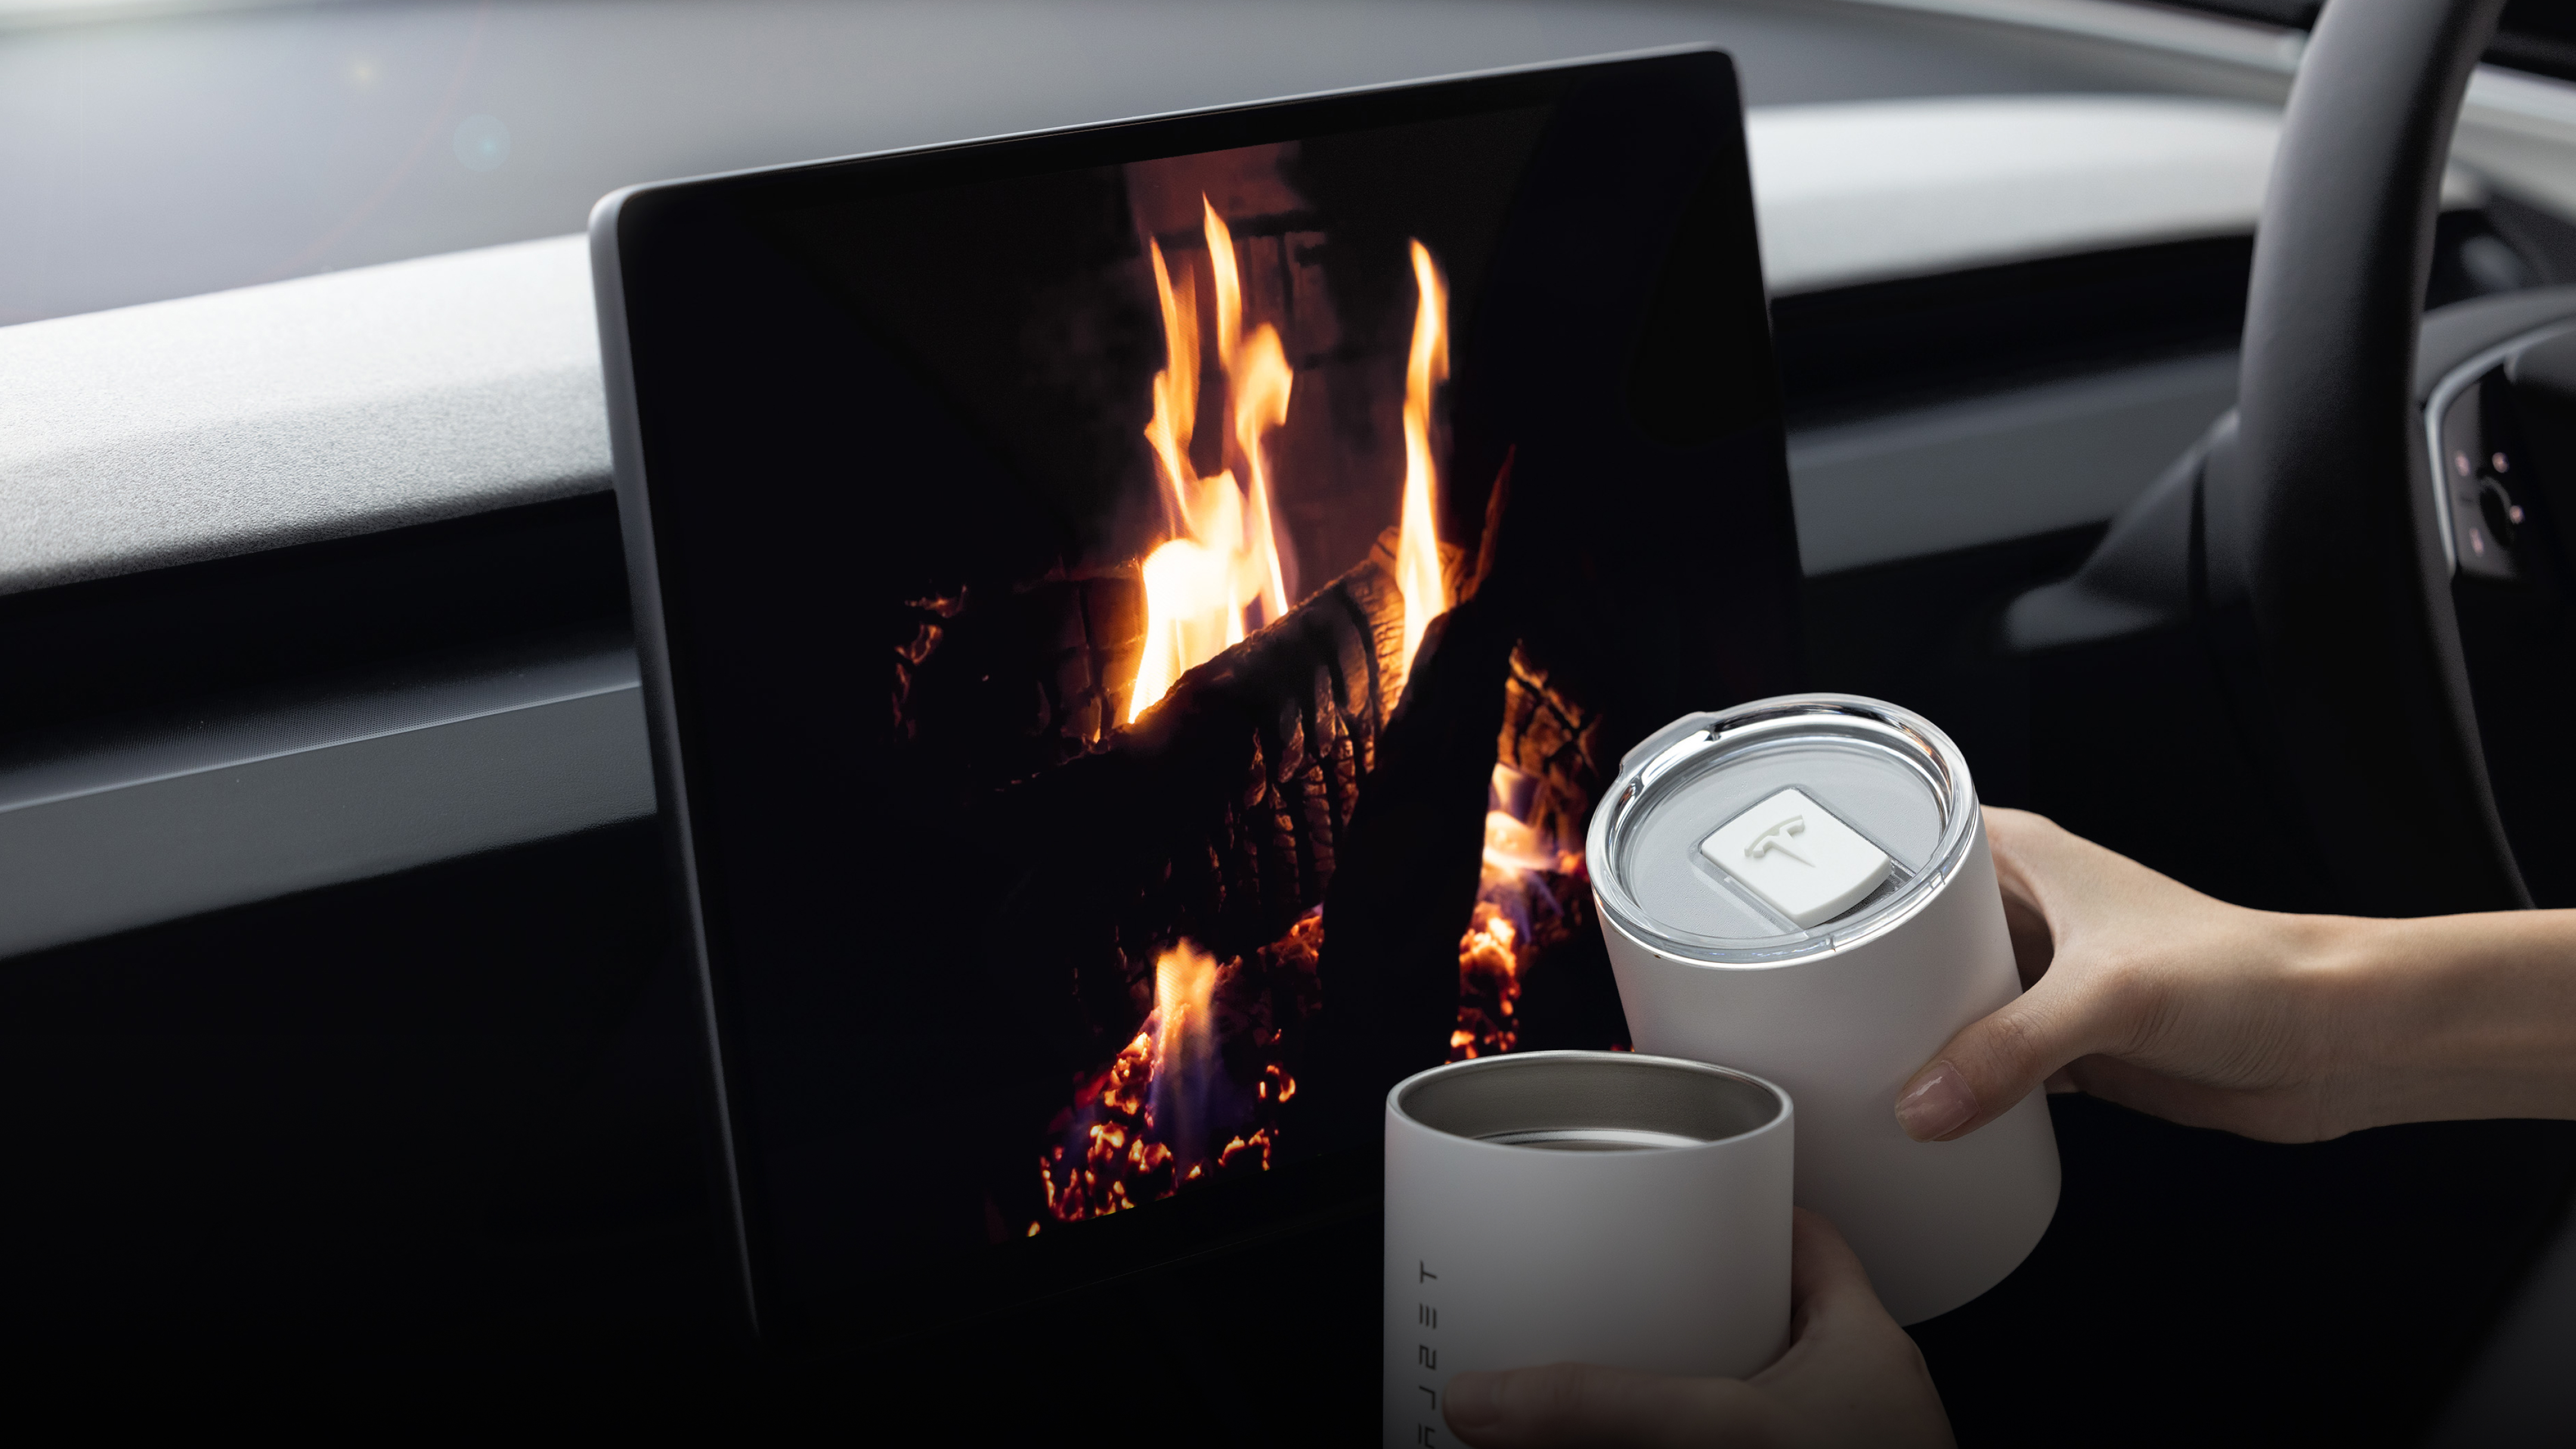 Center touchscreen displaying fireplace visuals.